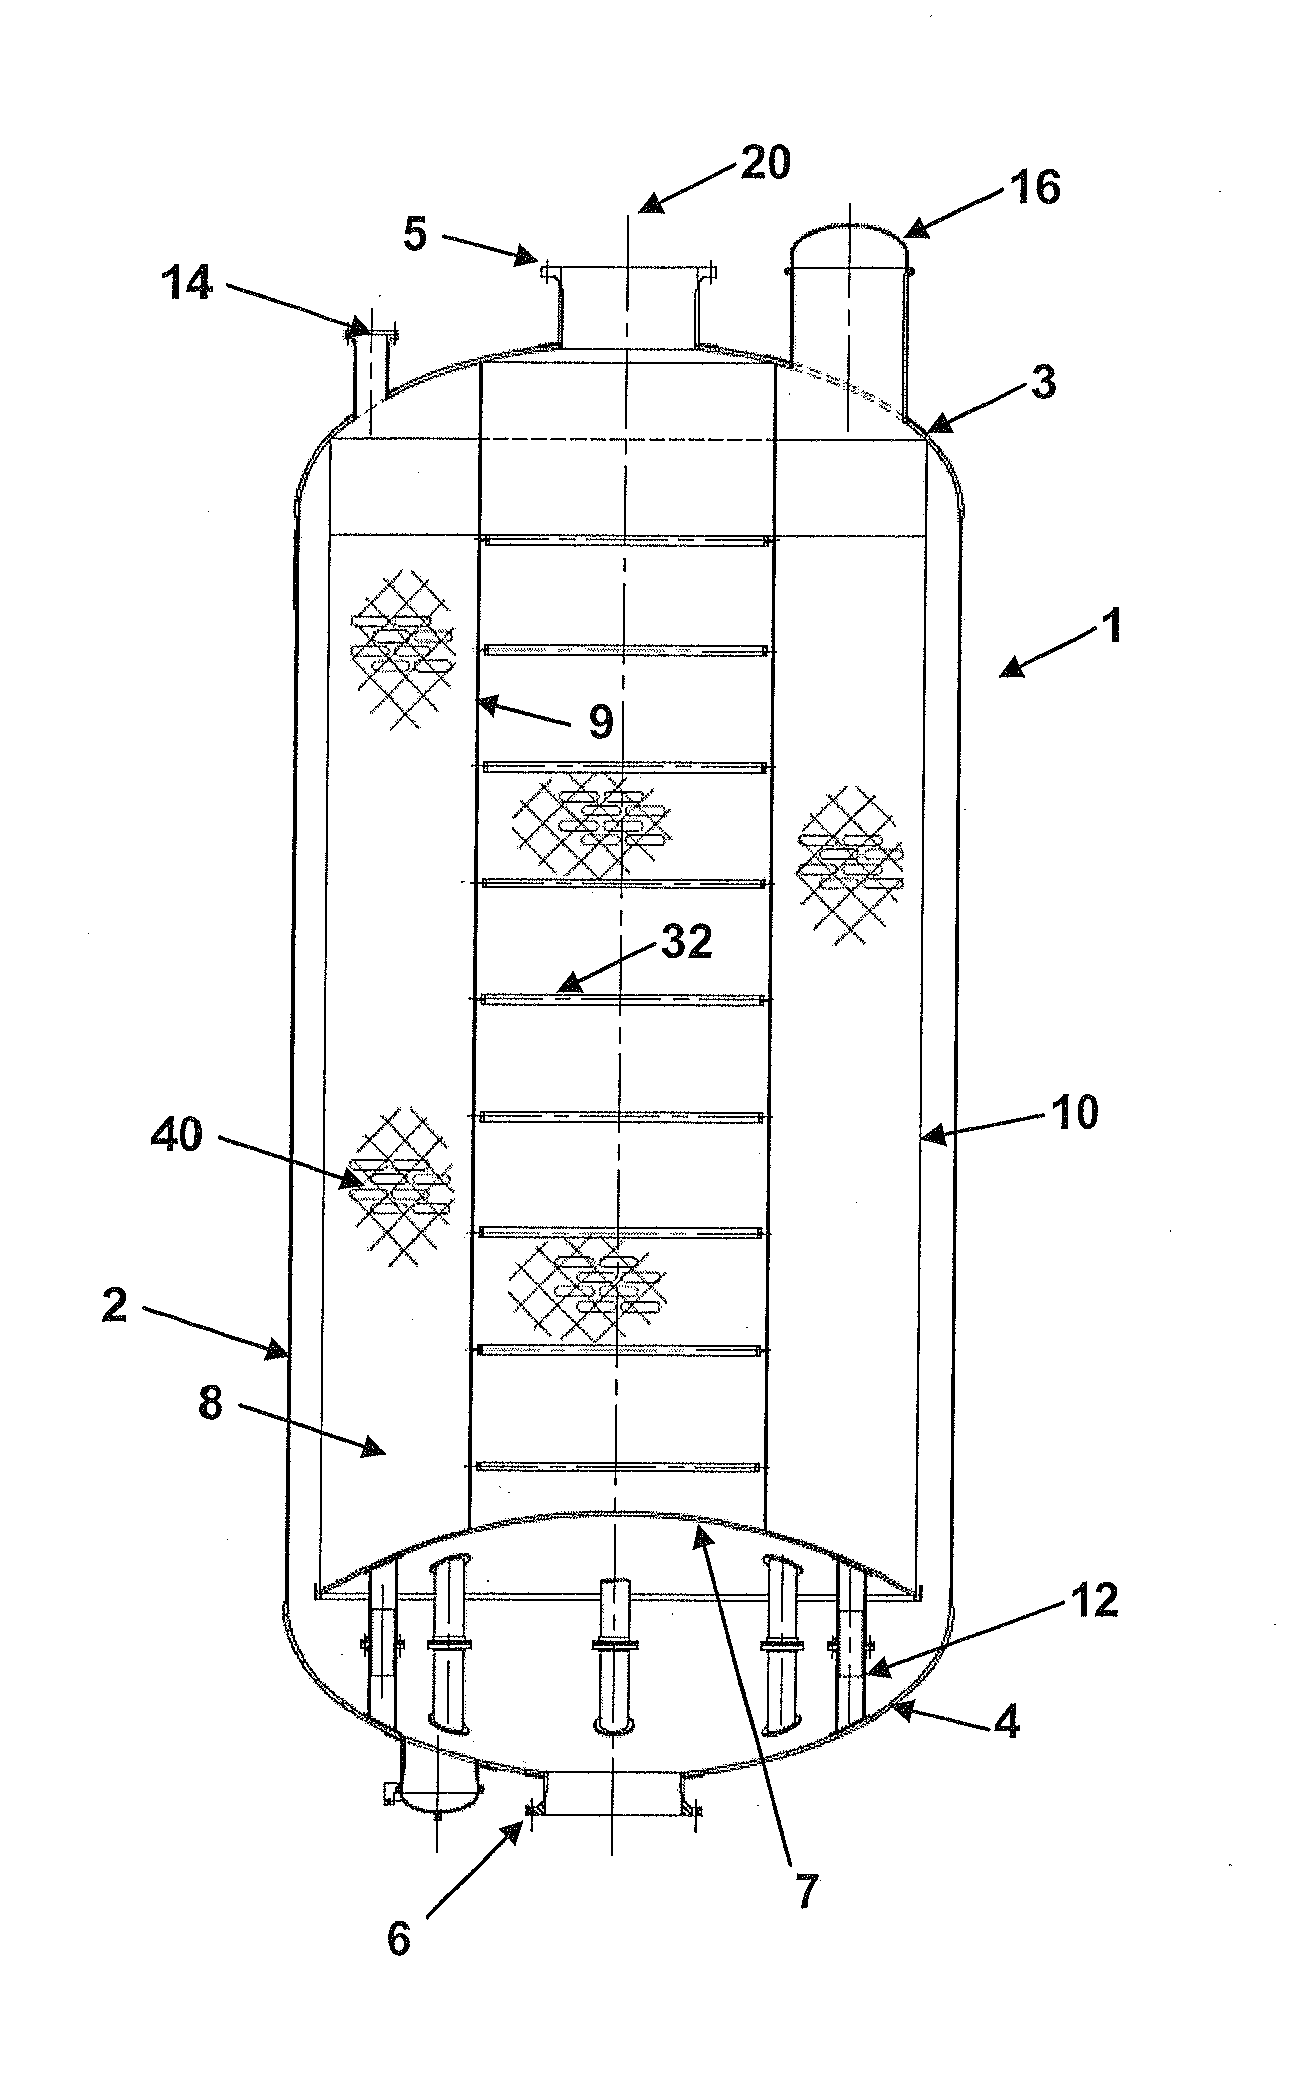 Radial flow reactor with movable supports